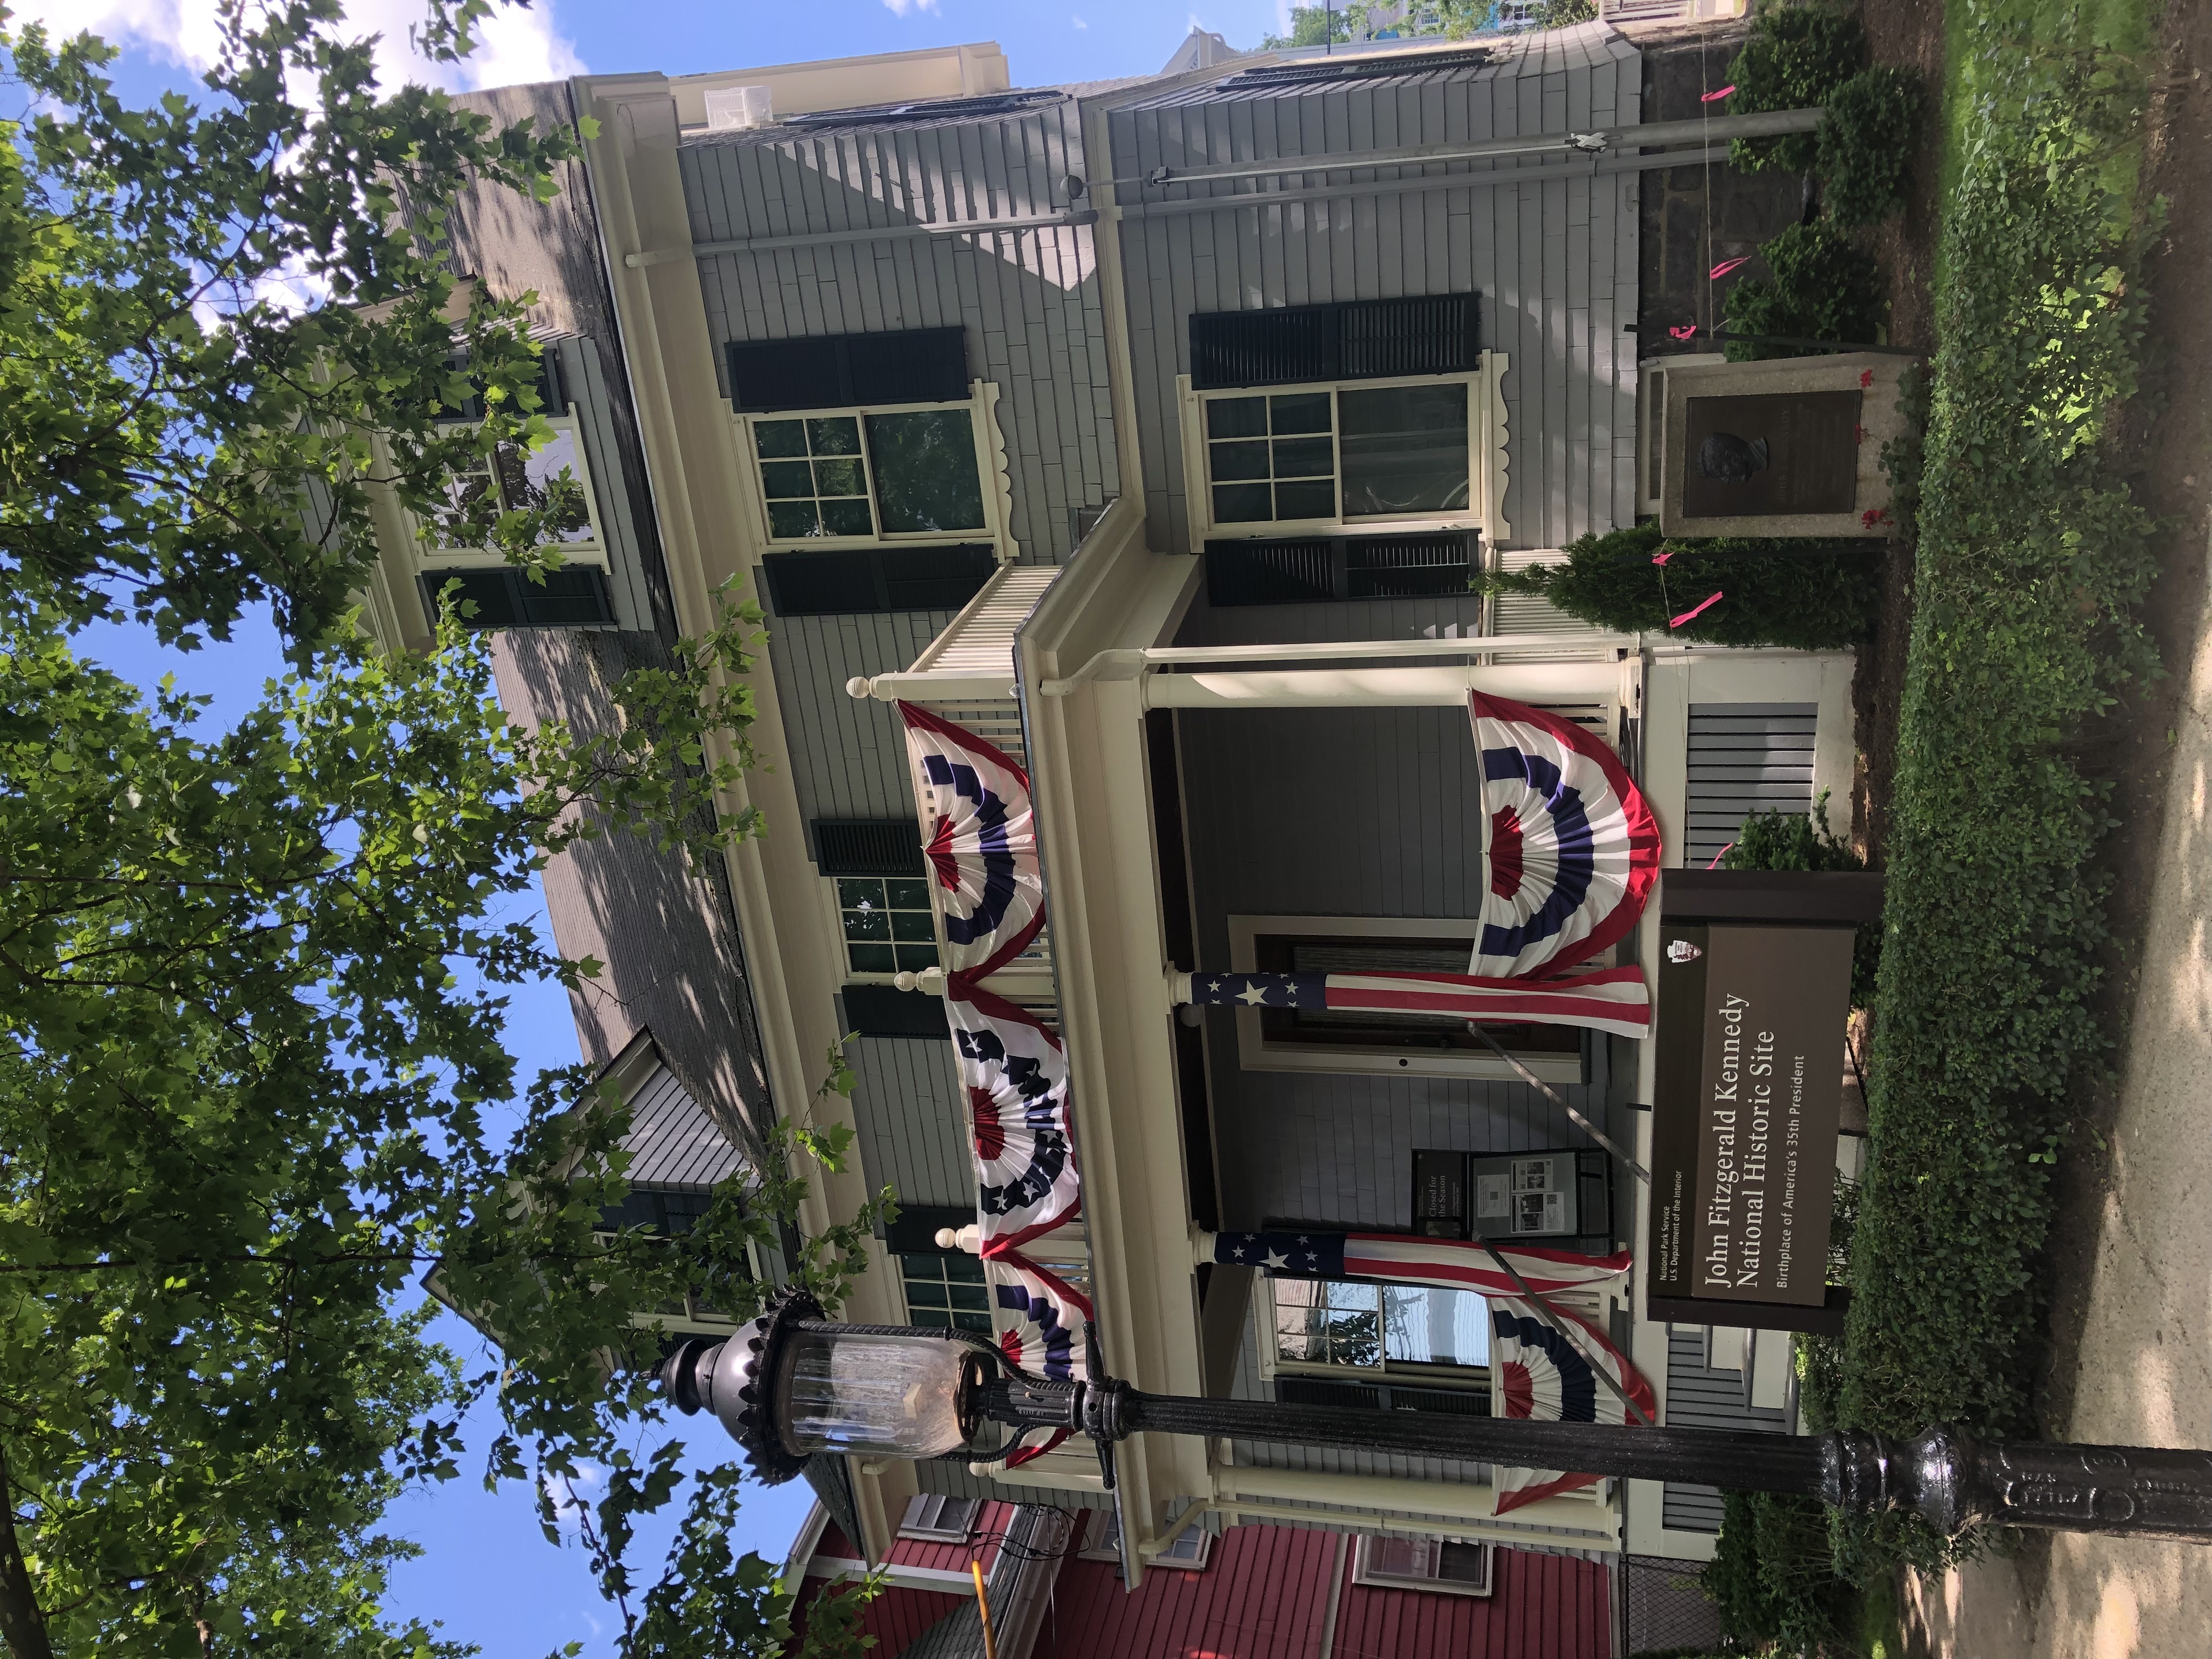 Photo of 83 Beals Street, the birthplace of JFK, newly renovated and with patriotic bunting out front.